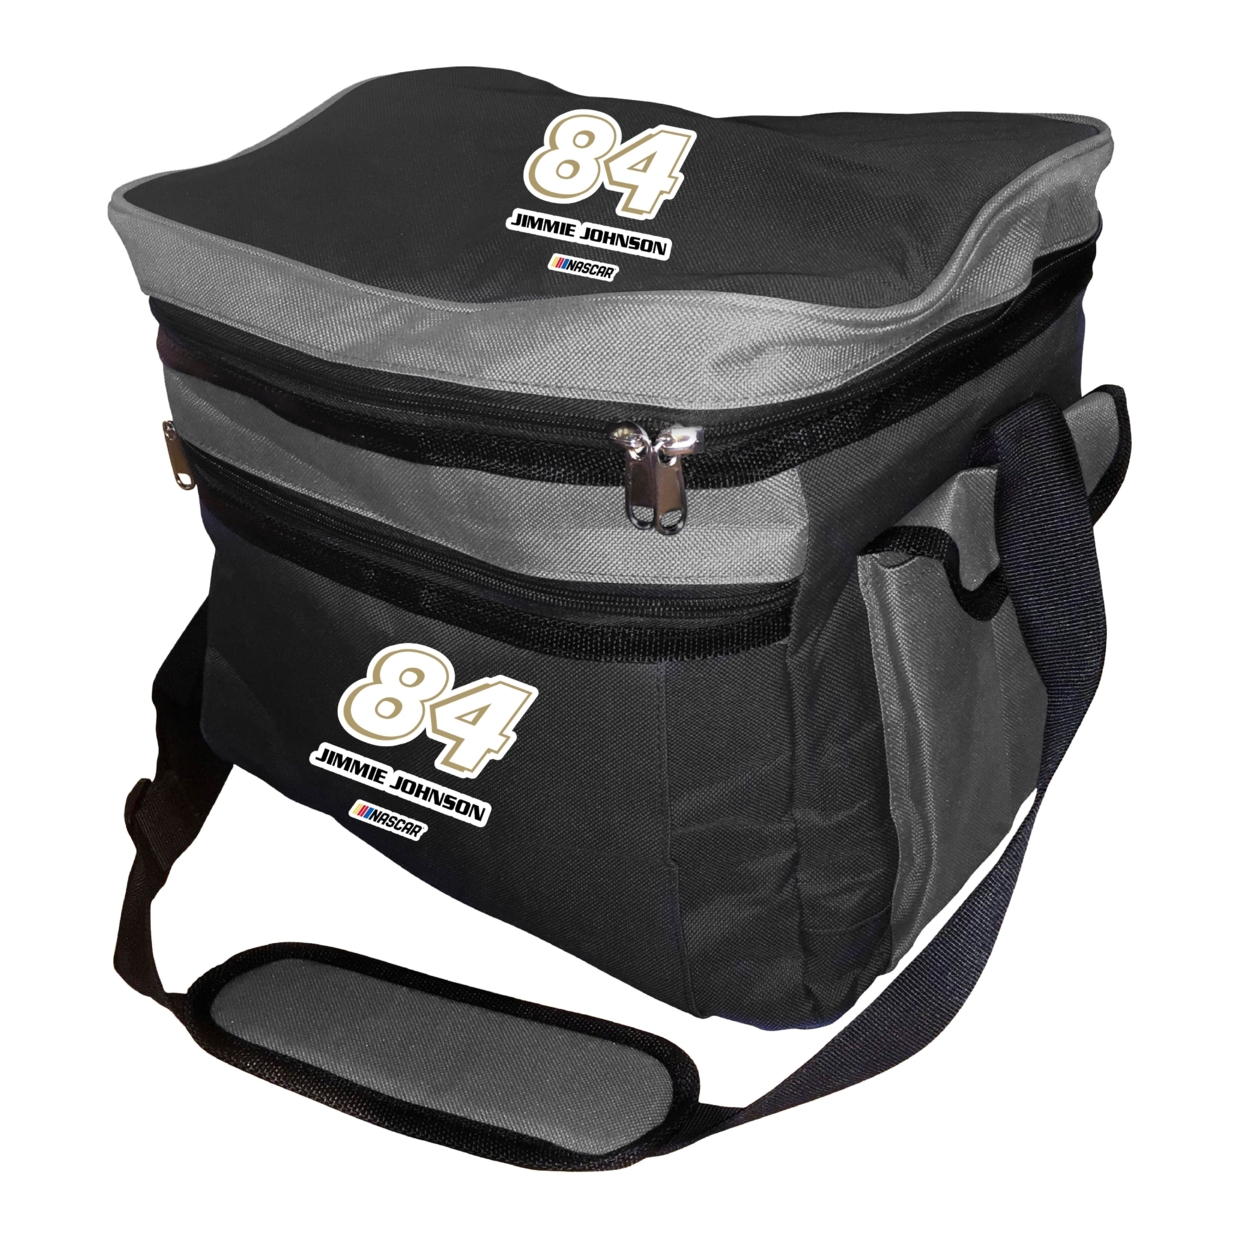 #84 Jimmie Johnson Officially Licensed 24 Pack Cooler Bag